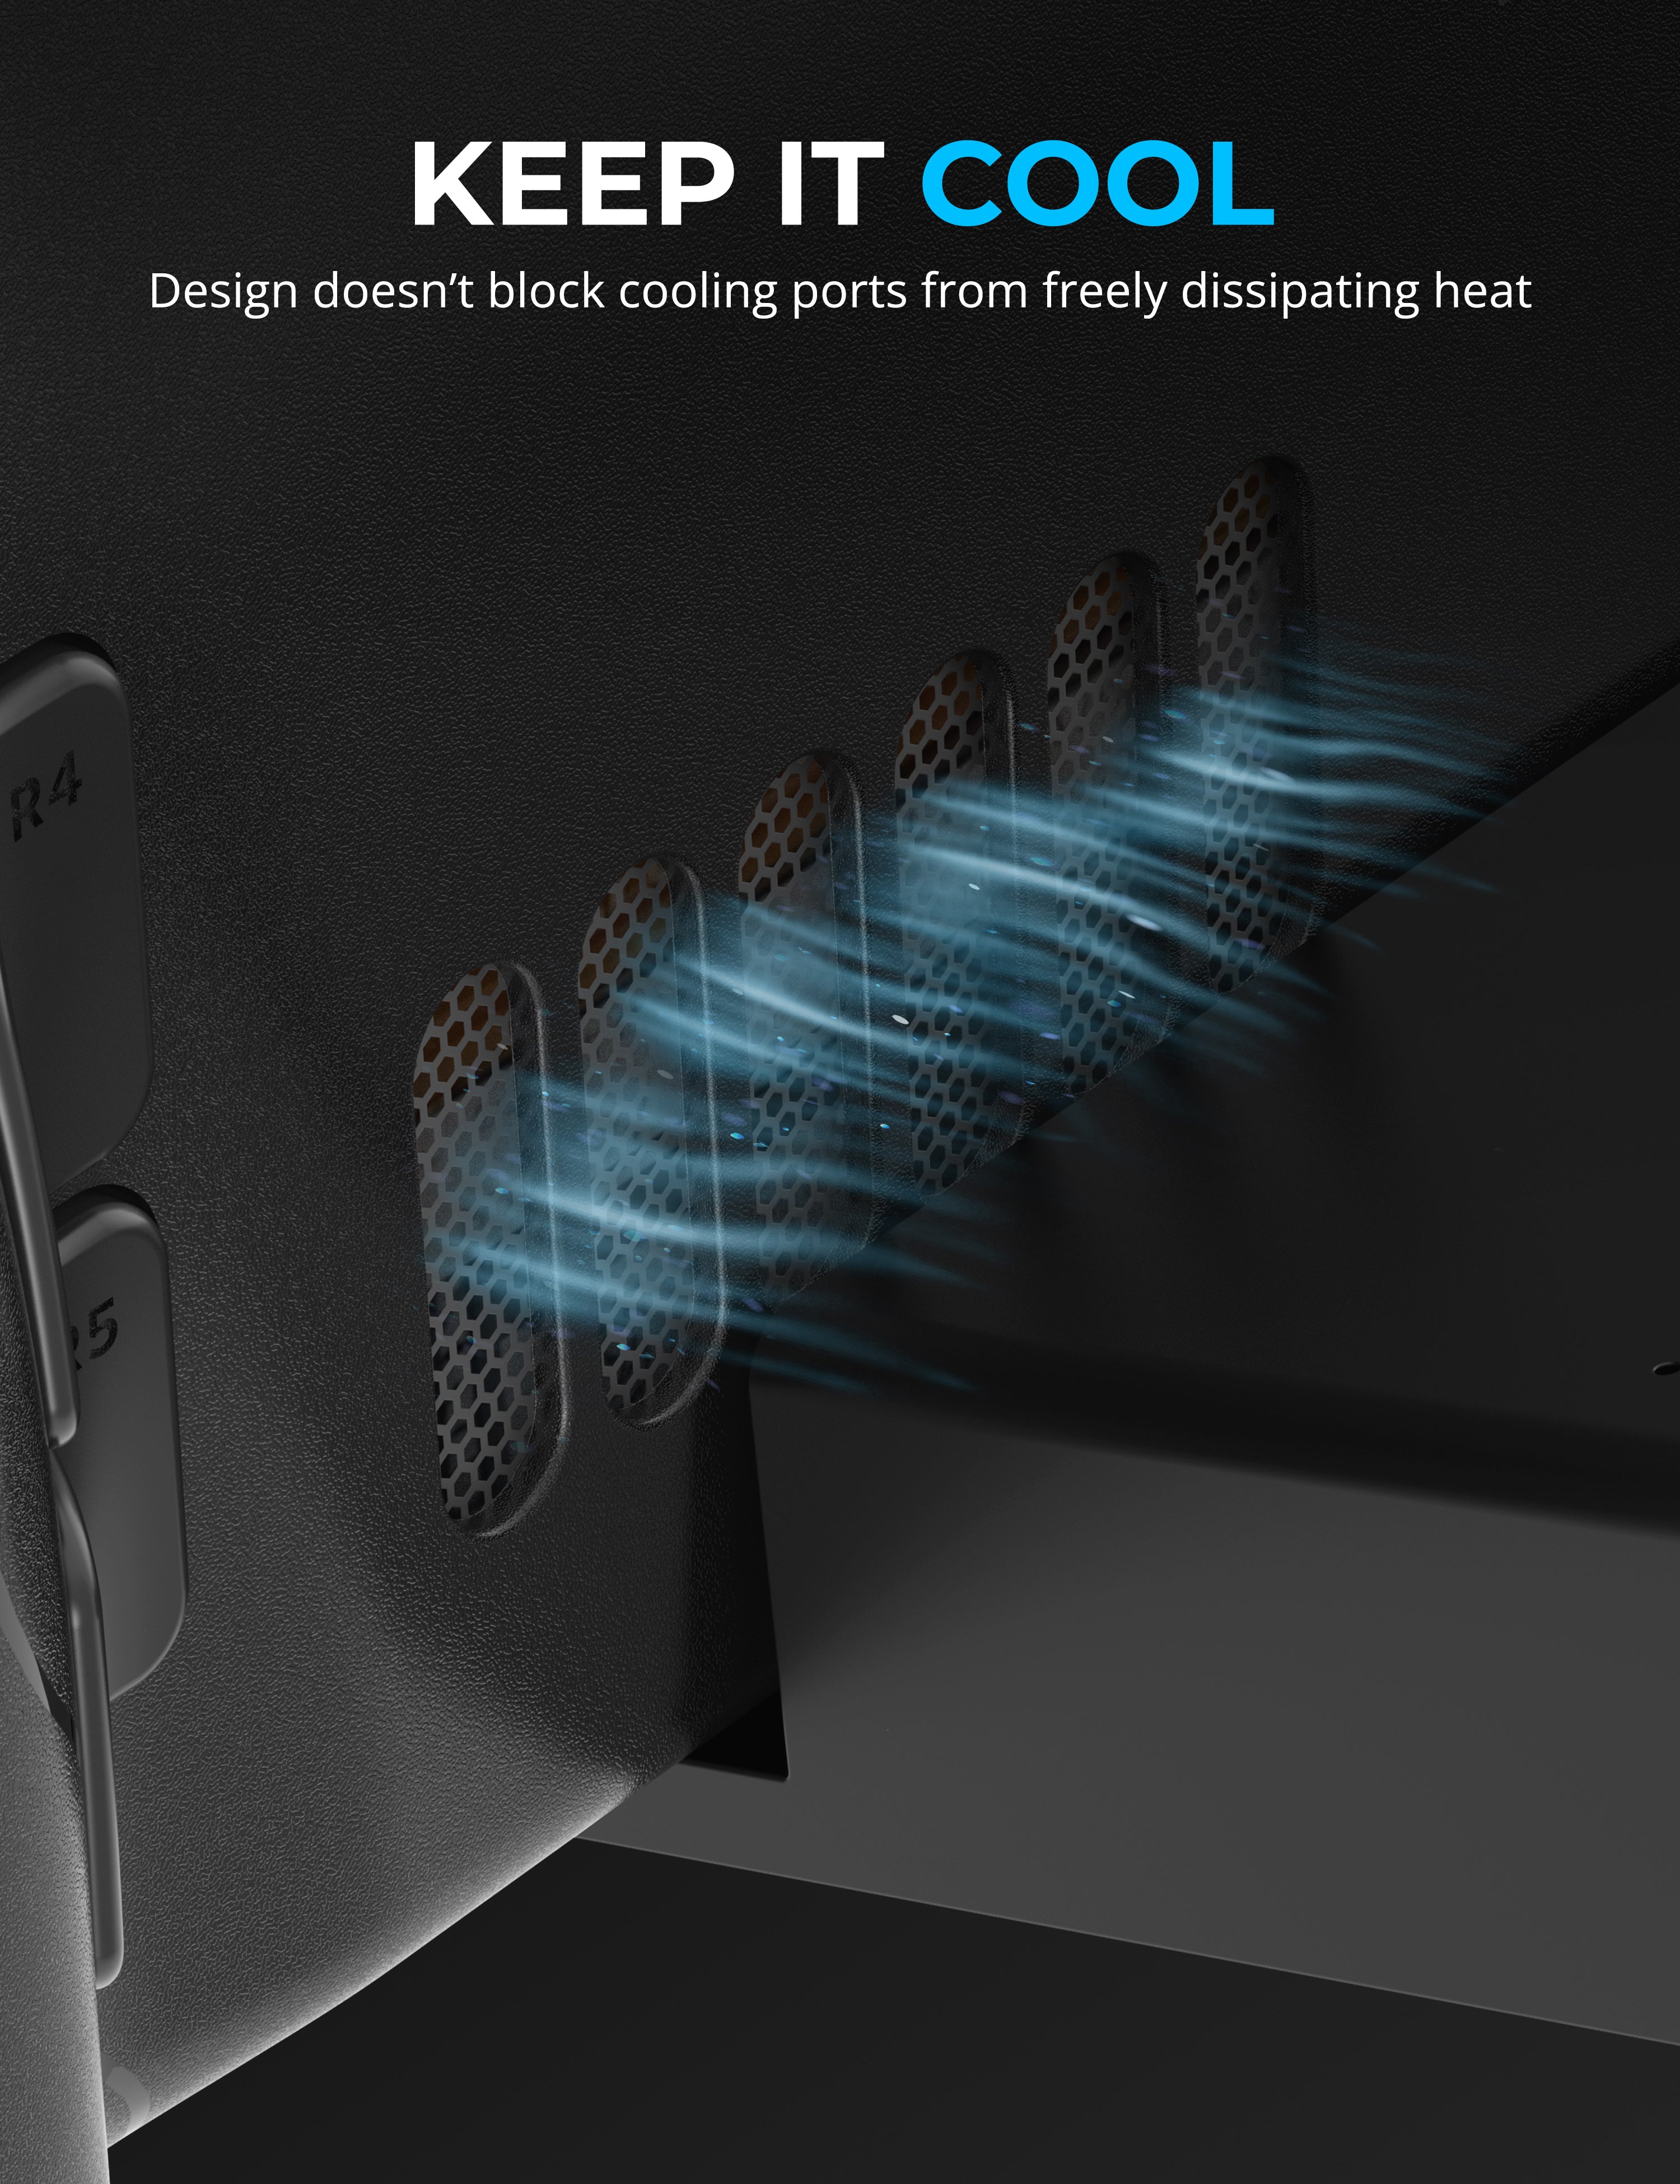 SABRENT Steam Deck Docking Station, 6-in-1 Steam Deck with HDMI 4K@60Hz,  USB-C 95W PD 3.0 Fast Charging, Triple USB Hub 3.0, 1 USB C Connection  Developed for Valve Steam Deck (DS-SD6P) 